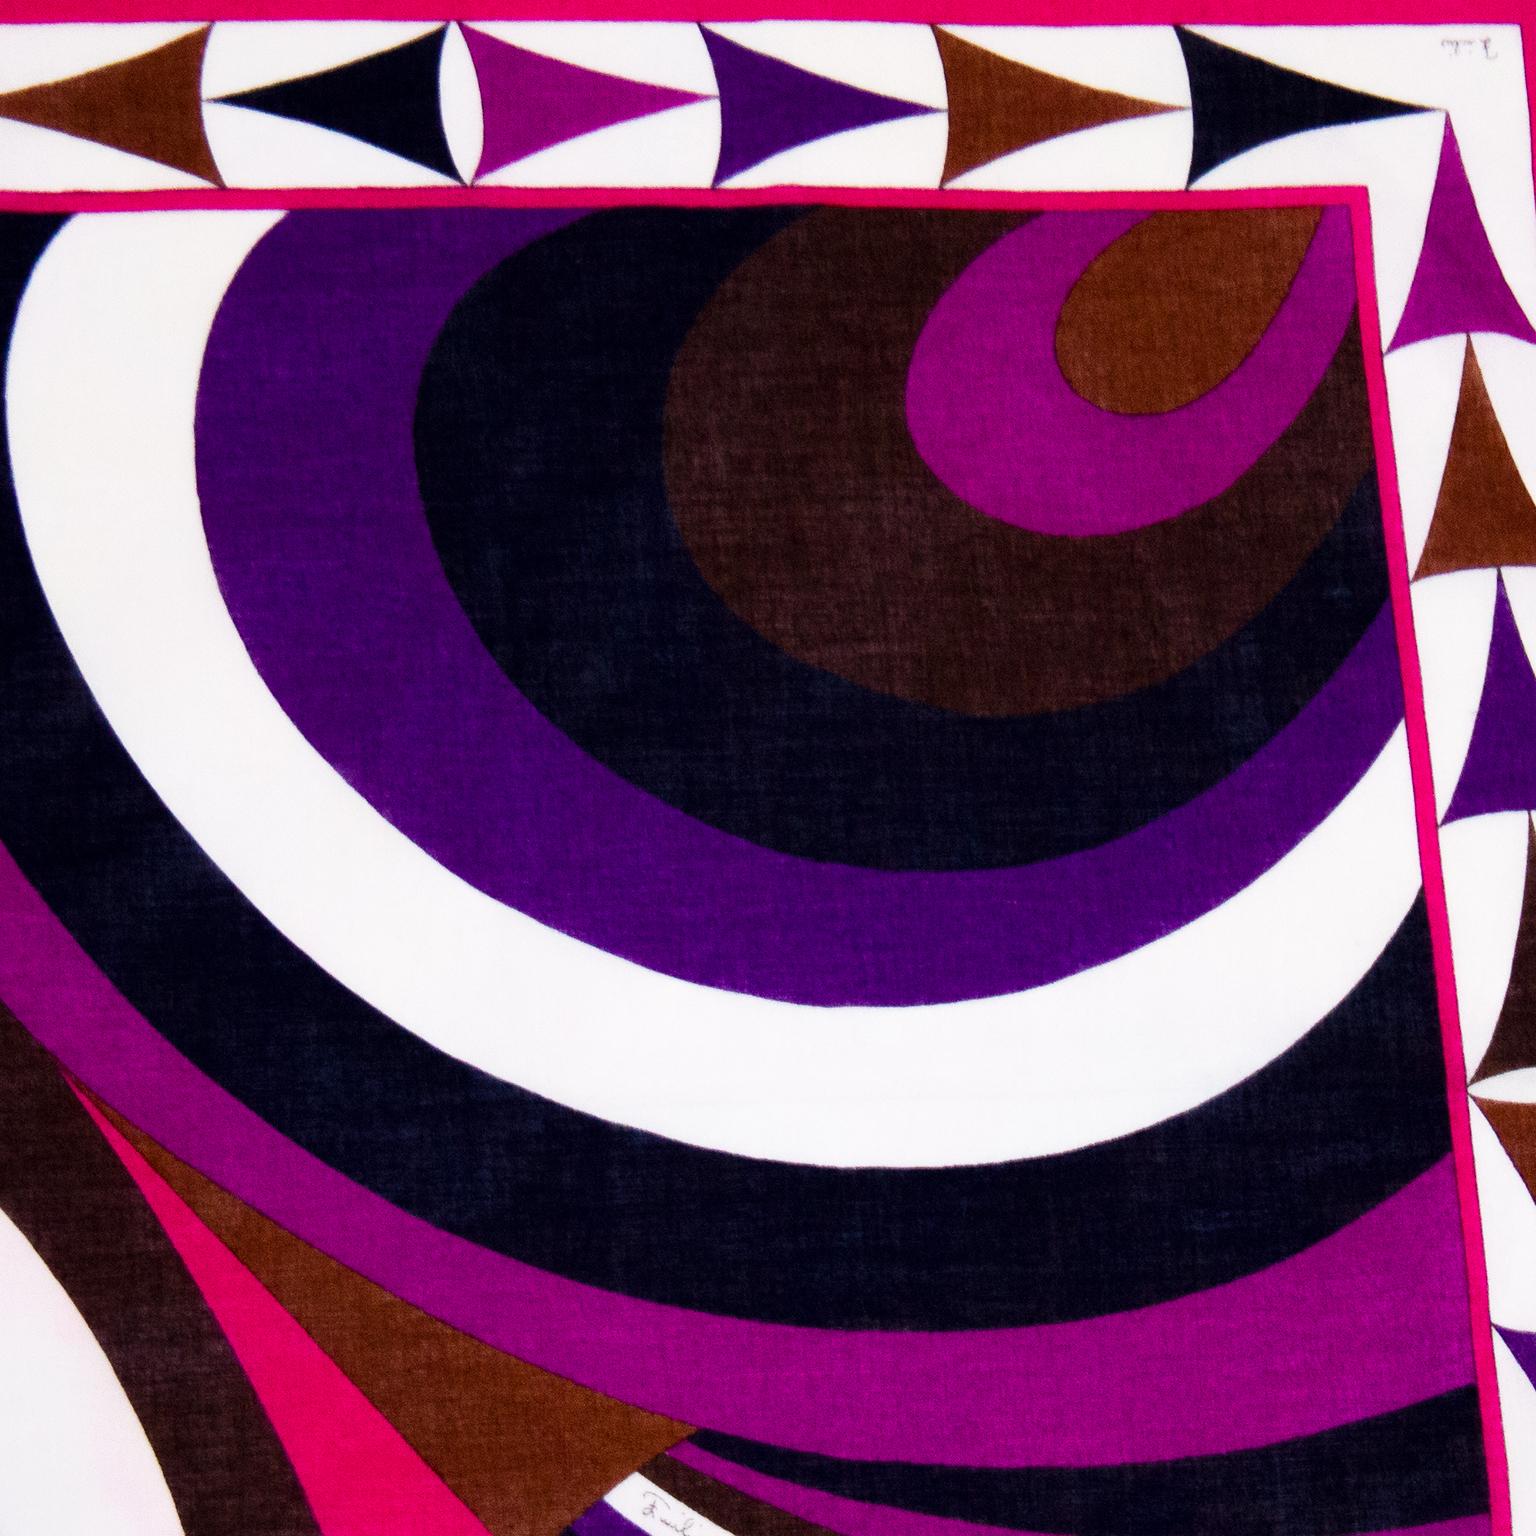 Small Emilio Pucci cotton scarf from the 1970s. All over abstract print in purple and brown tones. Signed fabric. The perfect summer scarf to be worn as a hair bandana or neckerchief. Excellent vintage condition. 16.5